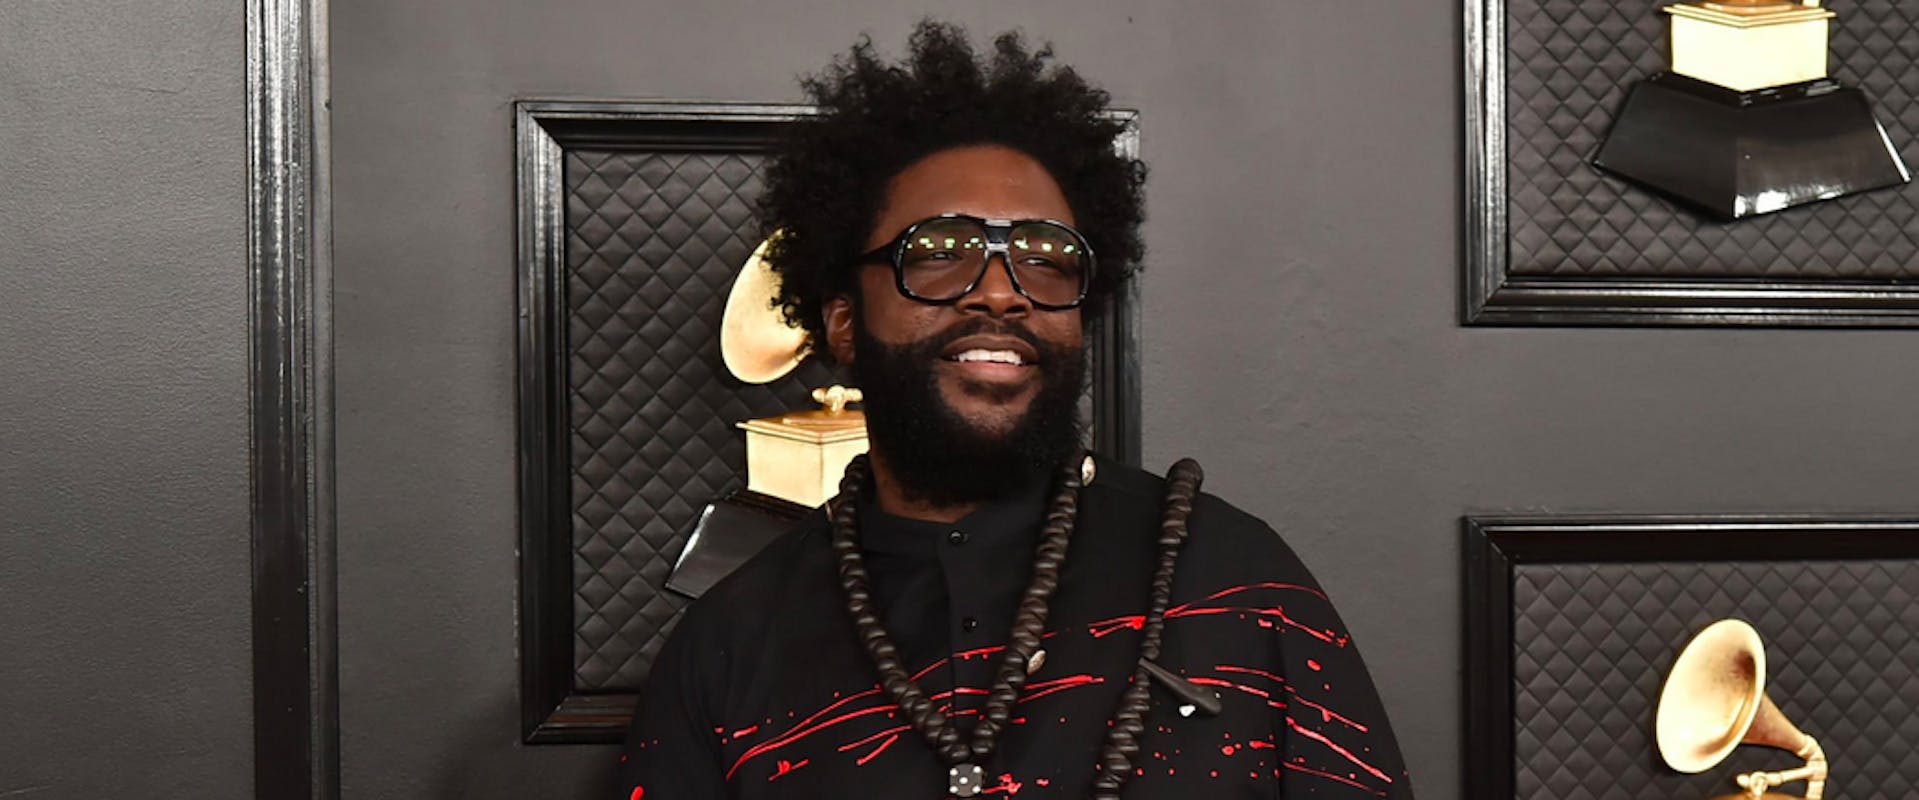 Questlove to CoCurate Grammy HipHop 50 Tribute Performance